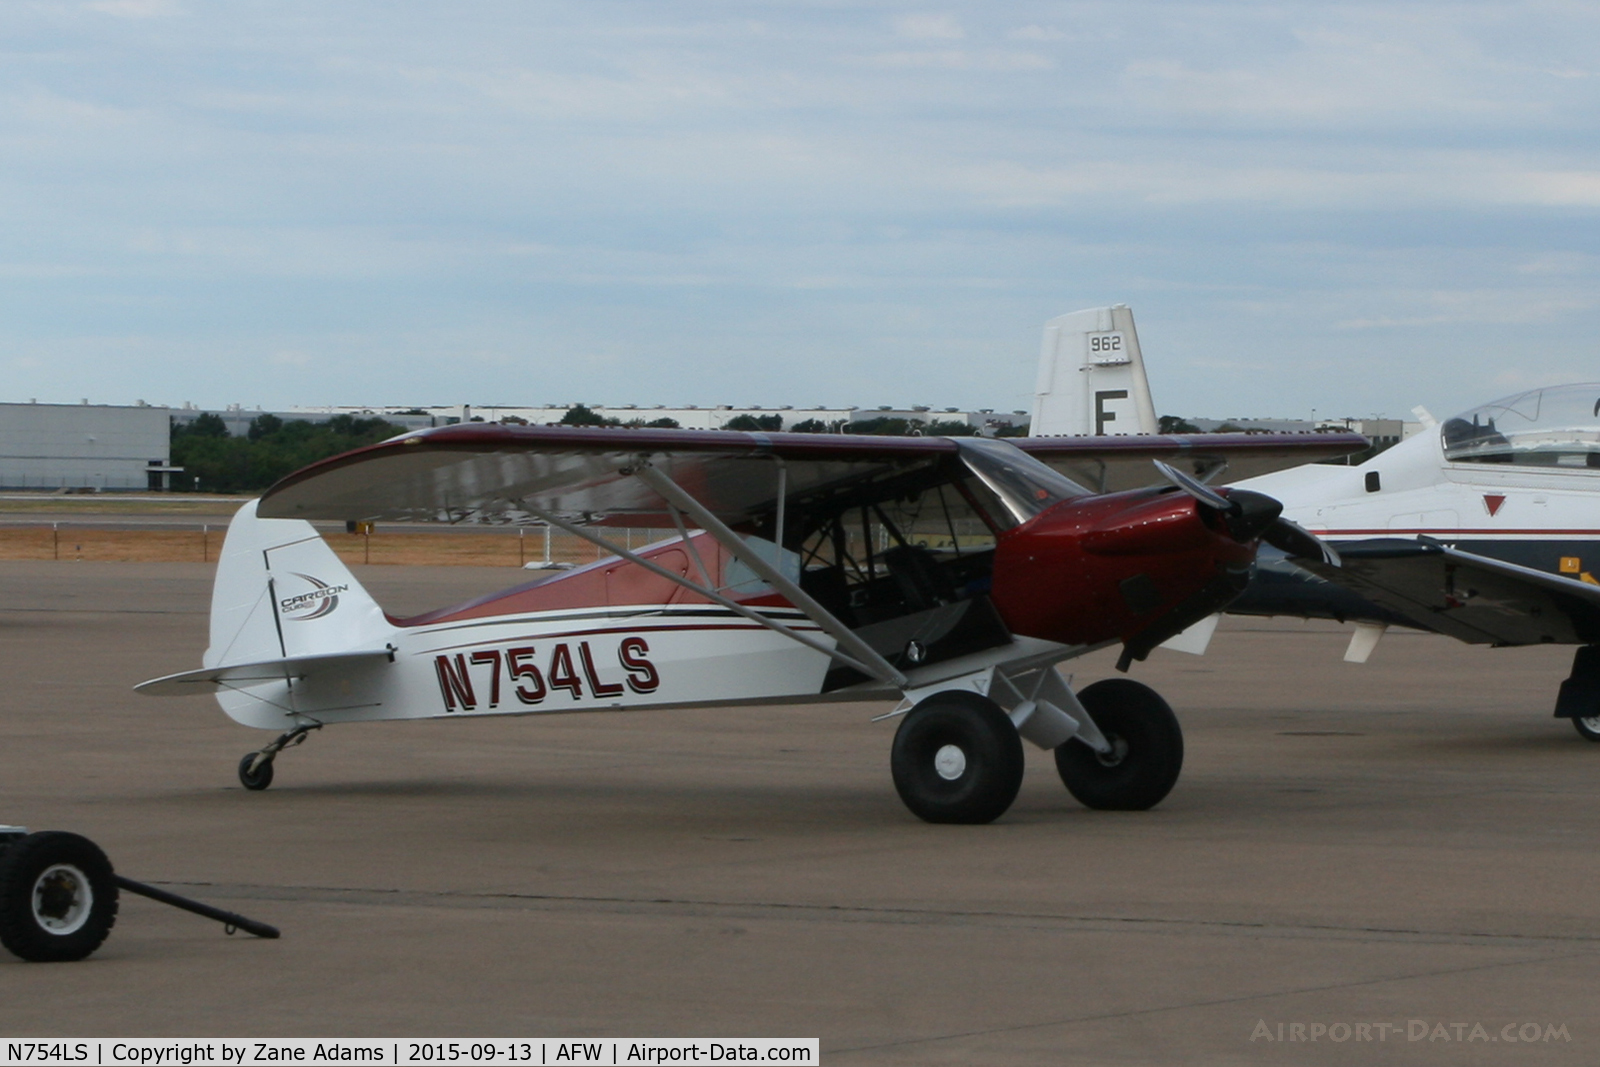 N754LS, 2014 Cub Crafters CC11-160 Carbon Cub SS C/N CC11-00326, At the 2015 Alliance Airshow - Fort Worth, Texas